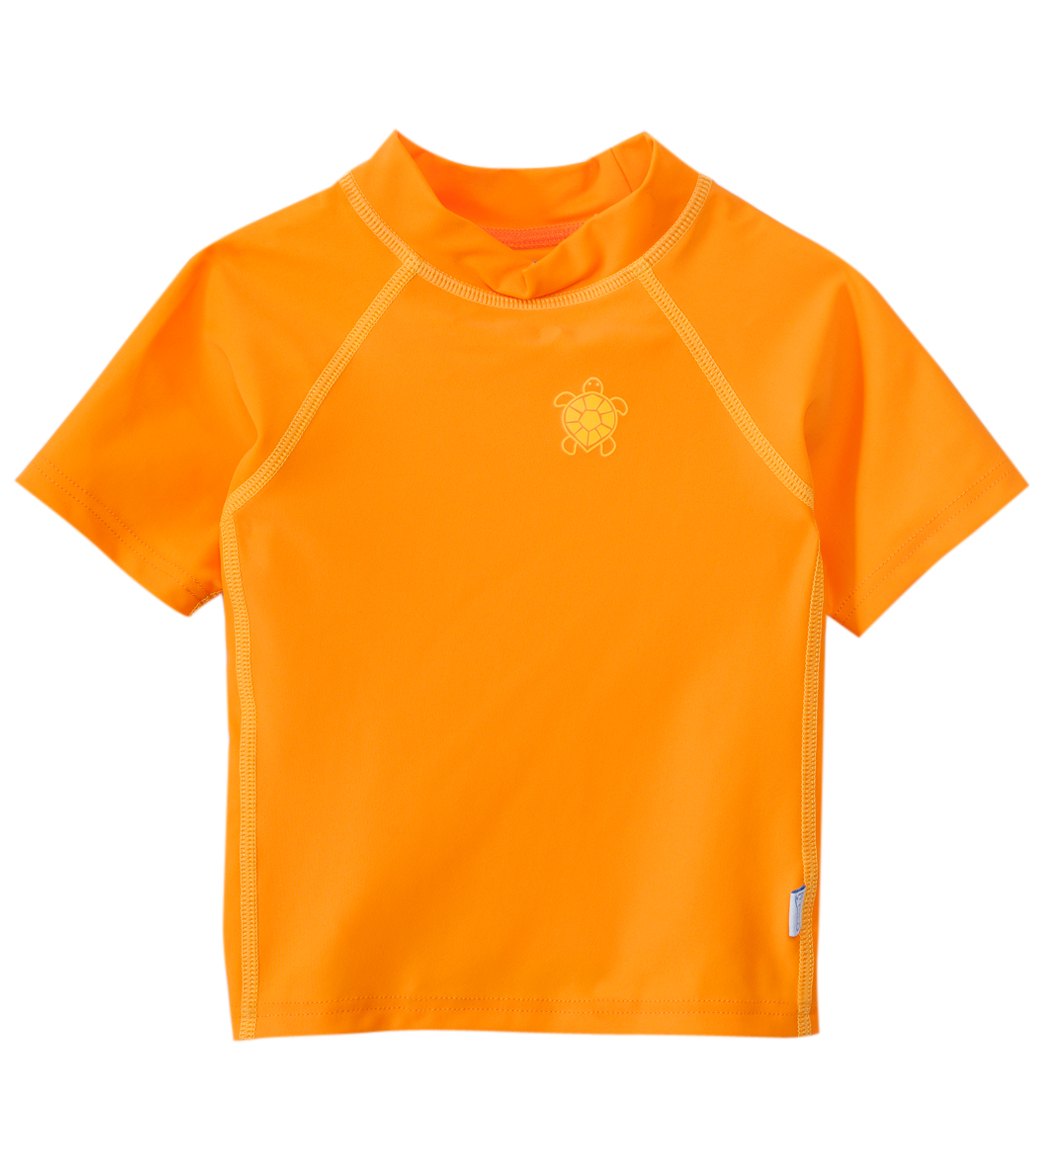 I Play. By Green Sprouts Short Sleeve Rashguard Baby - Orange Small 6 Mos - Swimoutlet.com